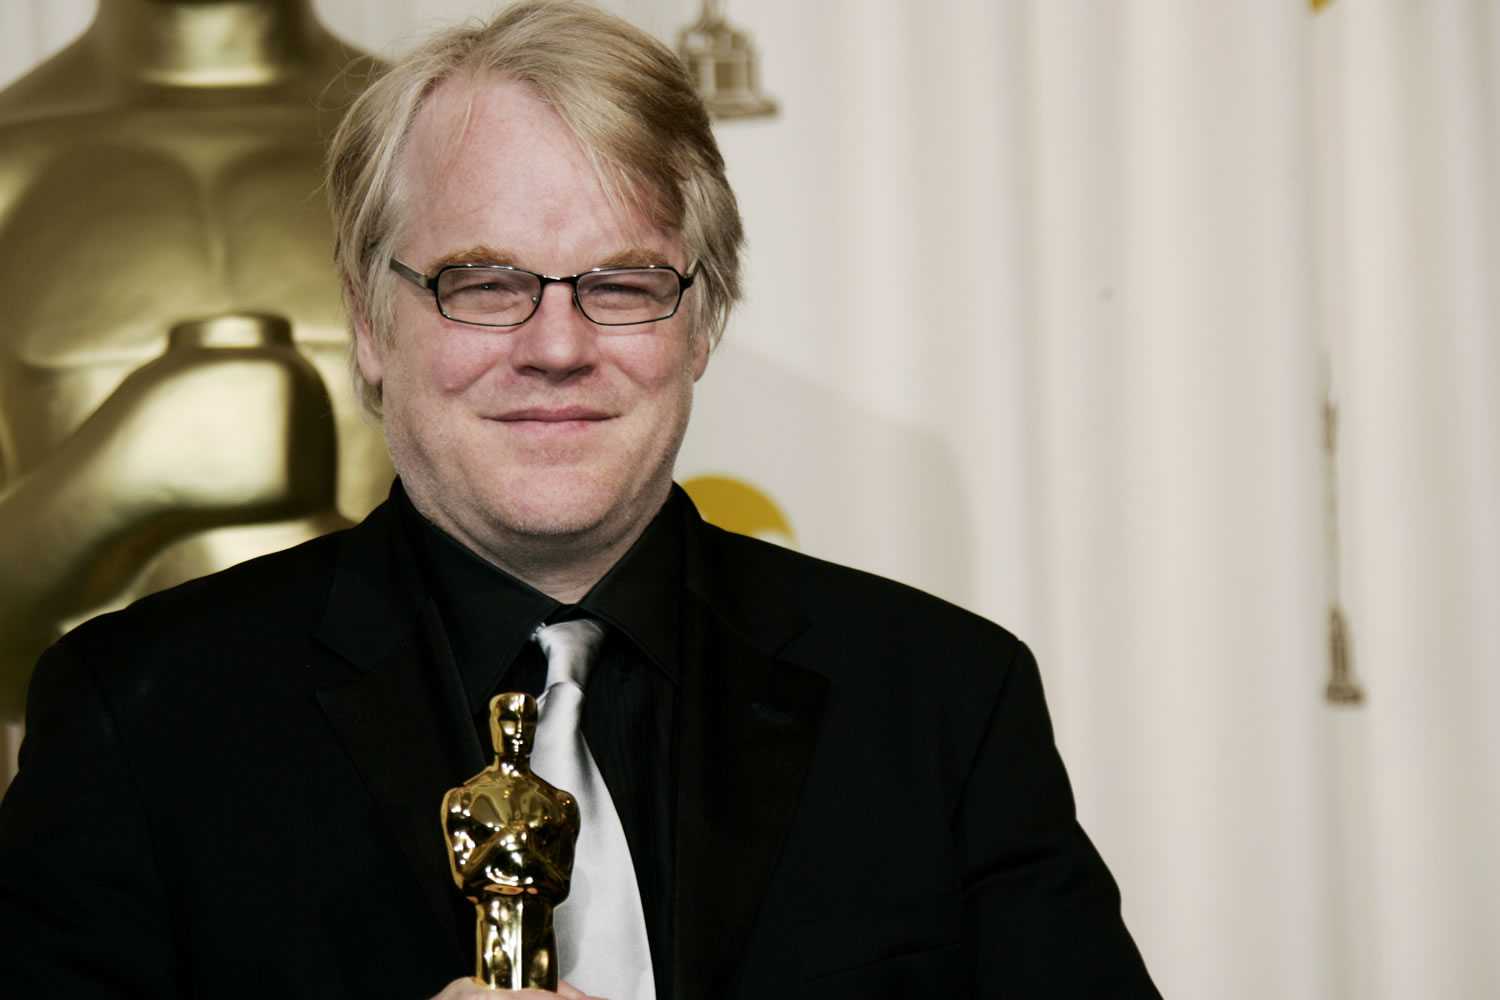 Actor Philip Seymour Hoffman poses with the Oscar he won for best actor for his work in &quot;Capote&quot; at the 78th Academy Awards, in Los Angeles. Police say Hoffman has been found dead in his apartment on Sunday.